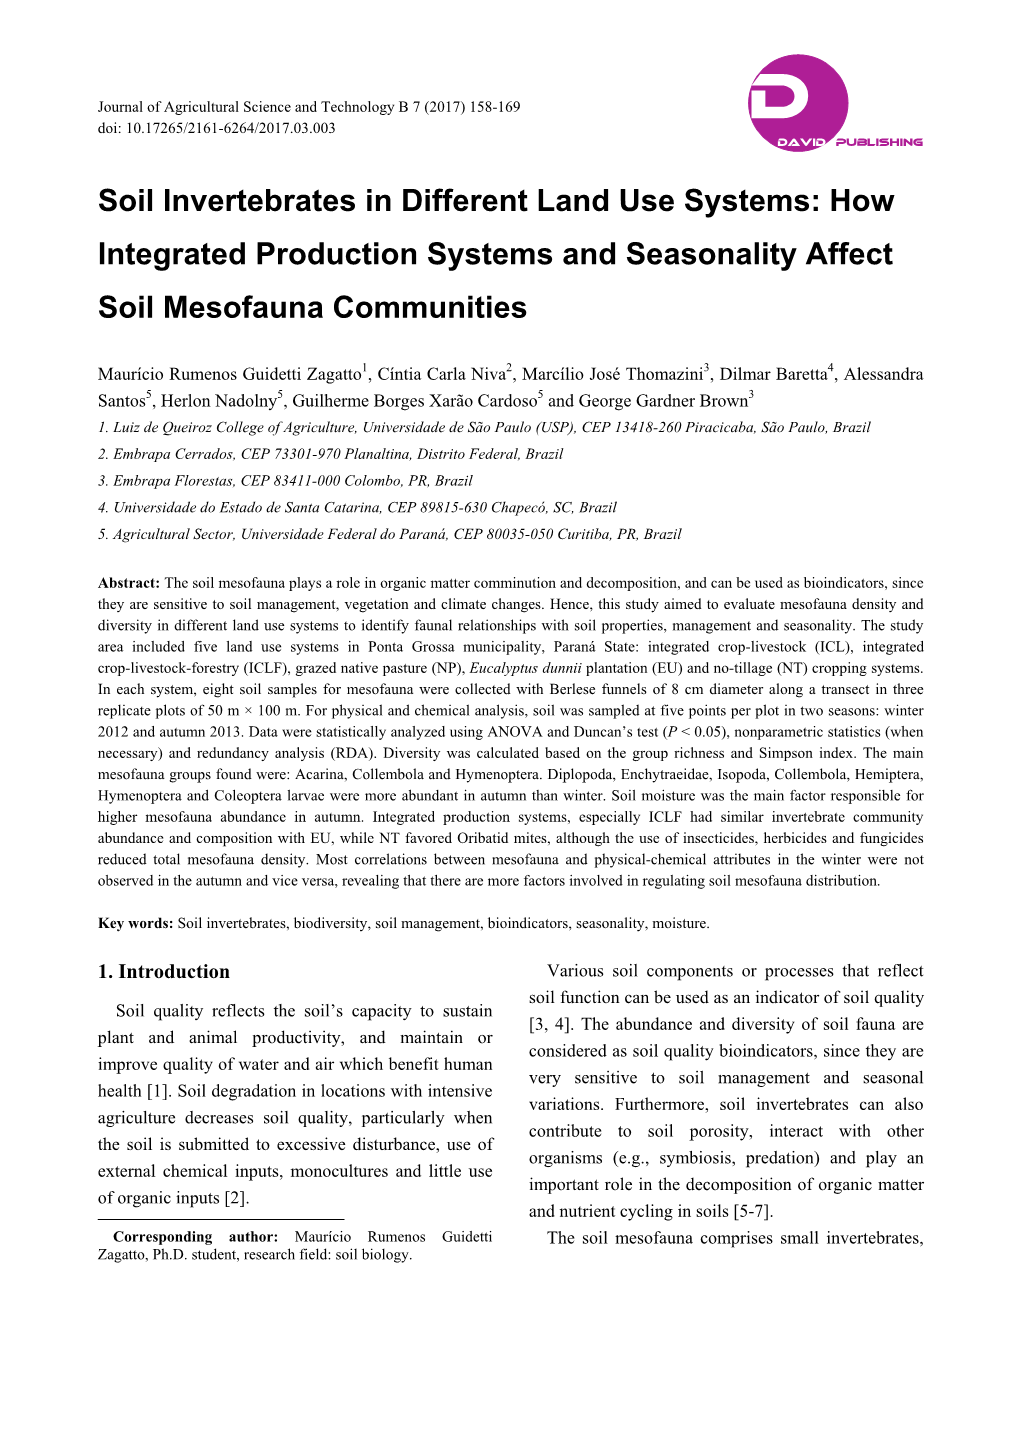 Soil Invertebrates in Different Land Use Systems: How Integrated Production Systems and Seasonality Affect Soil Mesofauna Communities